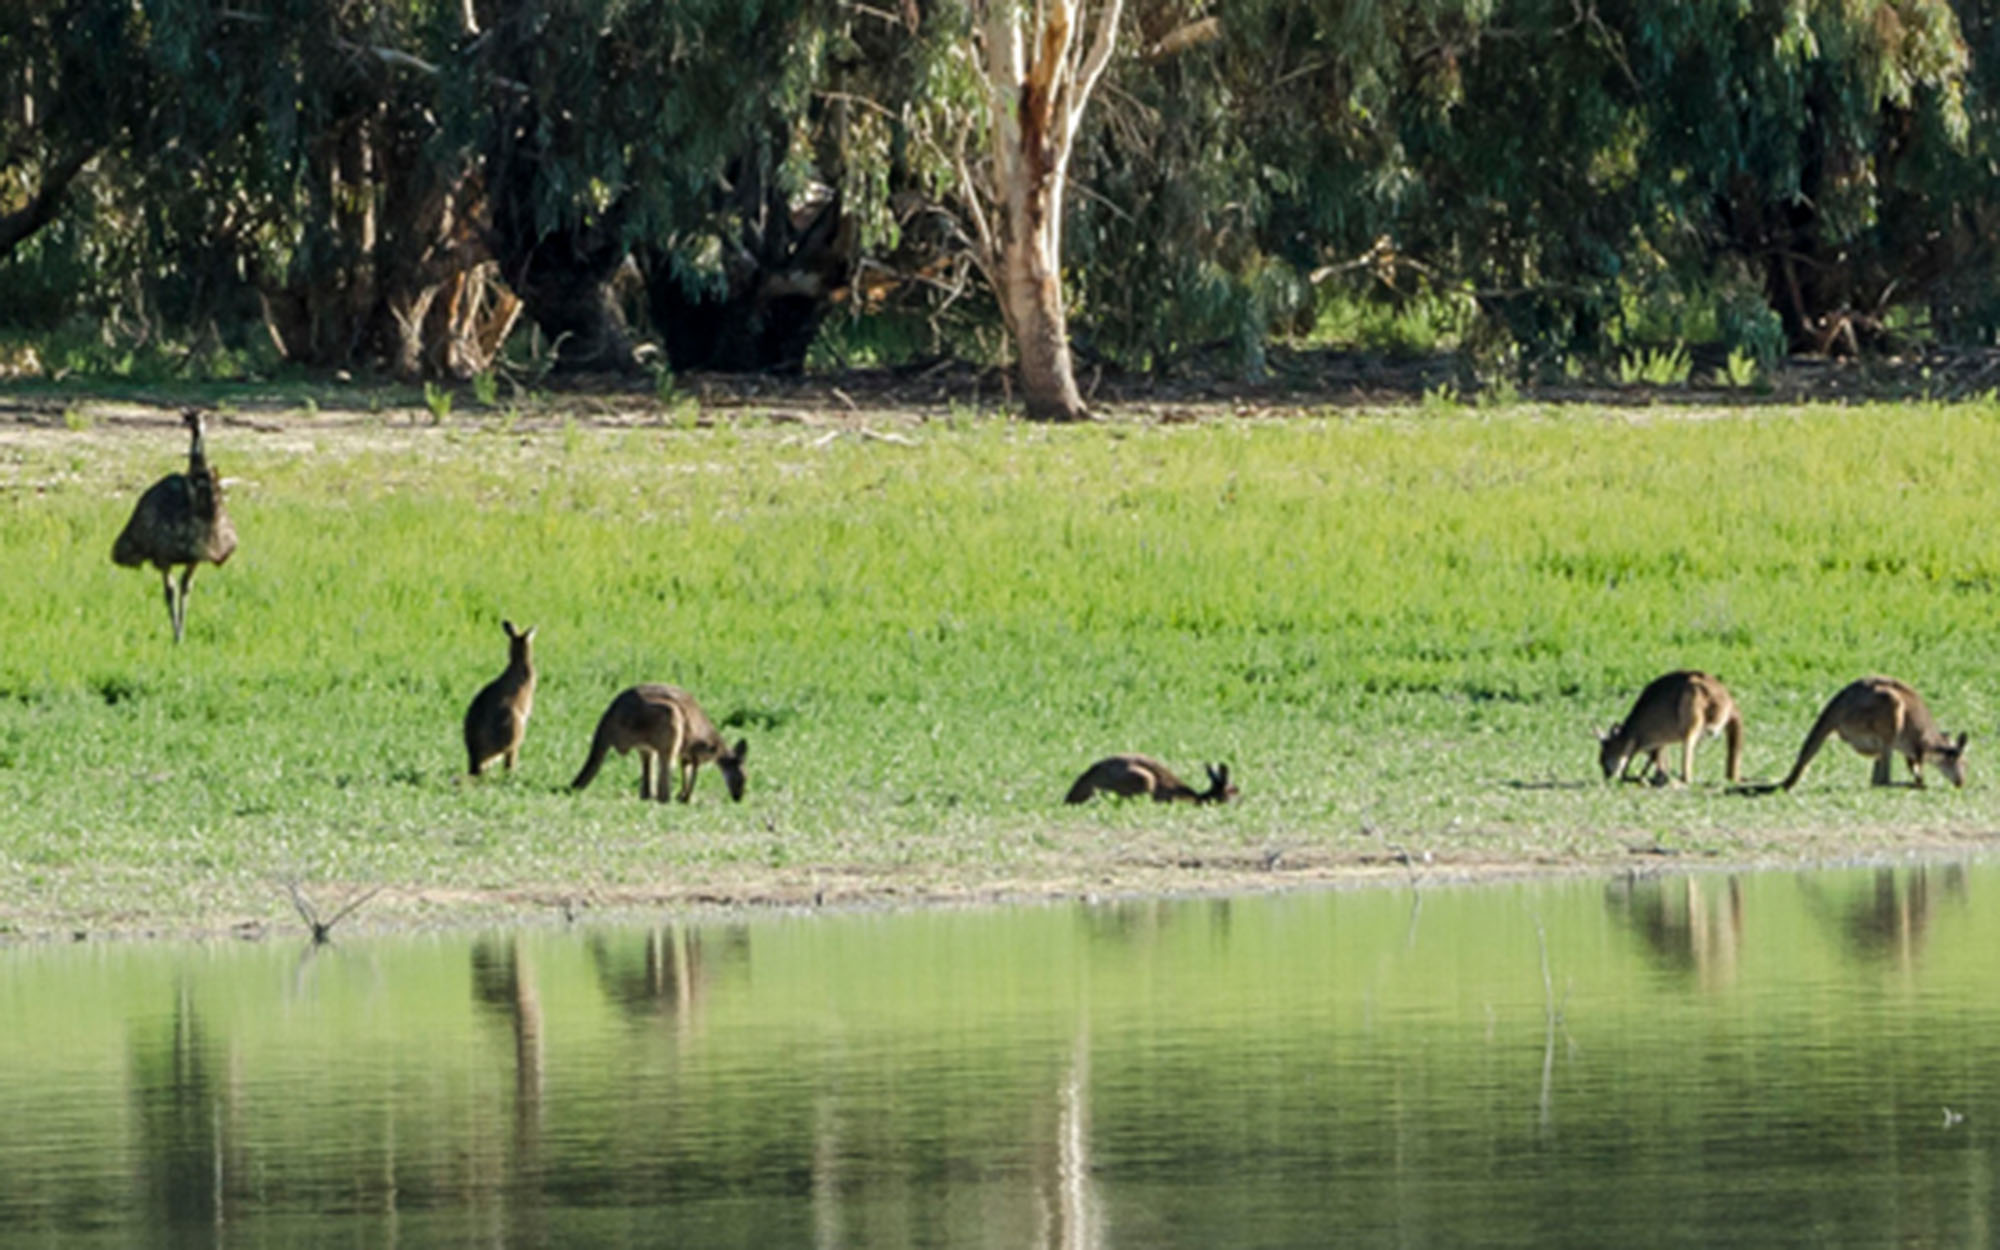 Emus and and kangaroos by the lakes edge 